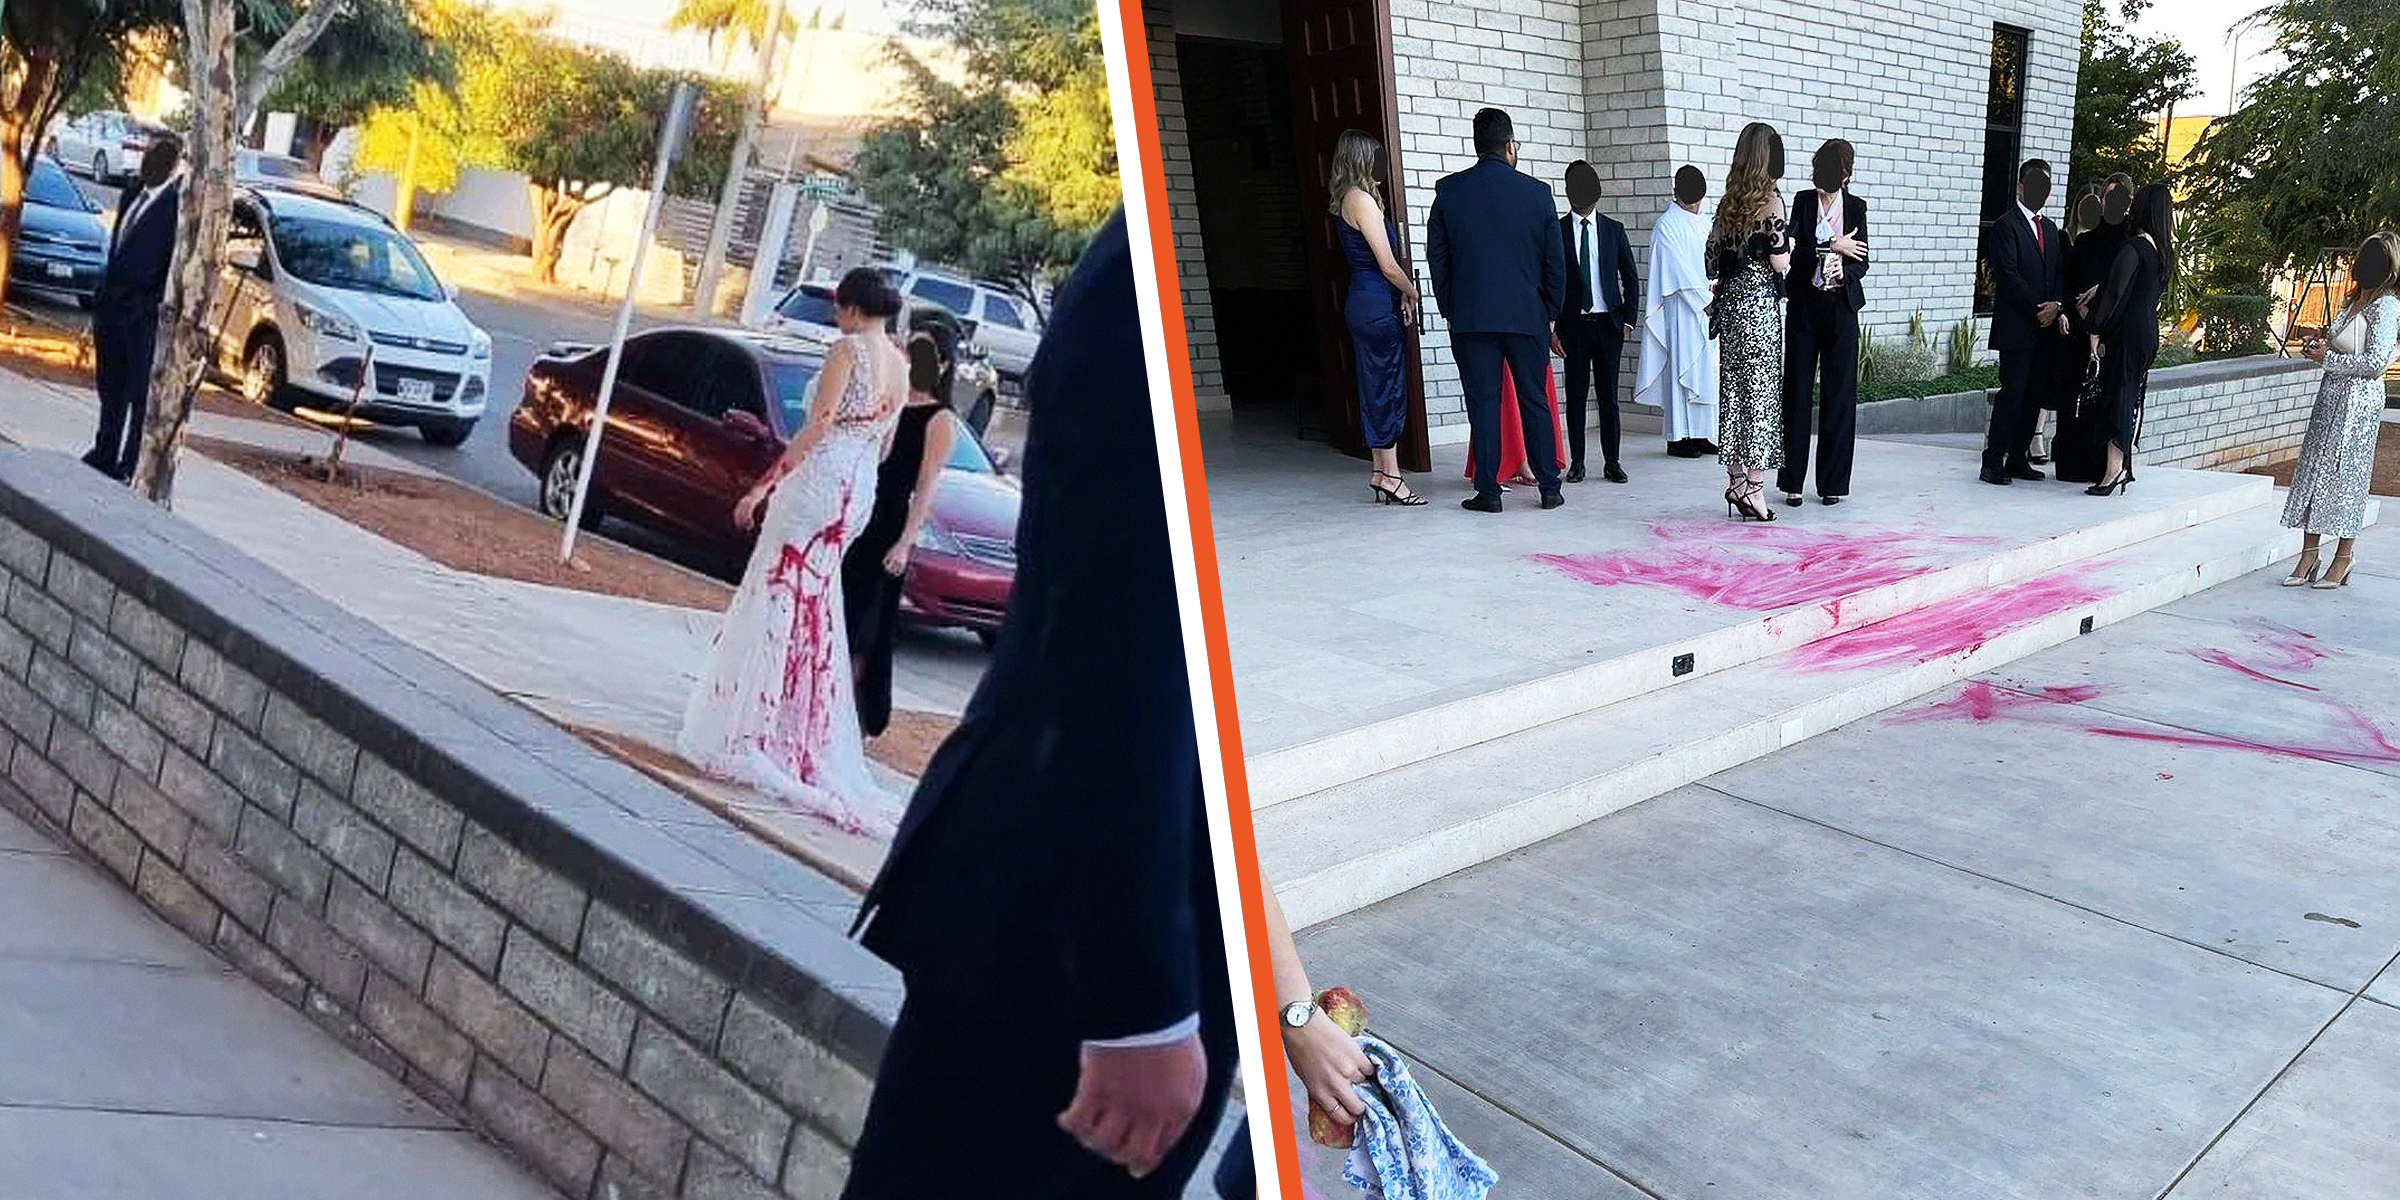 The bride with paint on her wedding dress | Guests at the wedding | Source: Reddit/r/weddingshaming